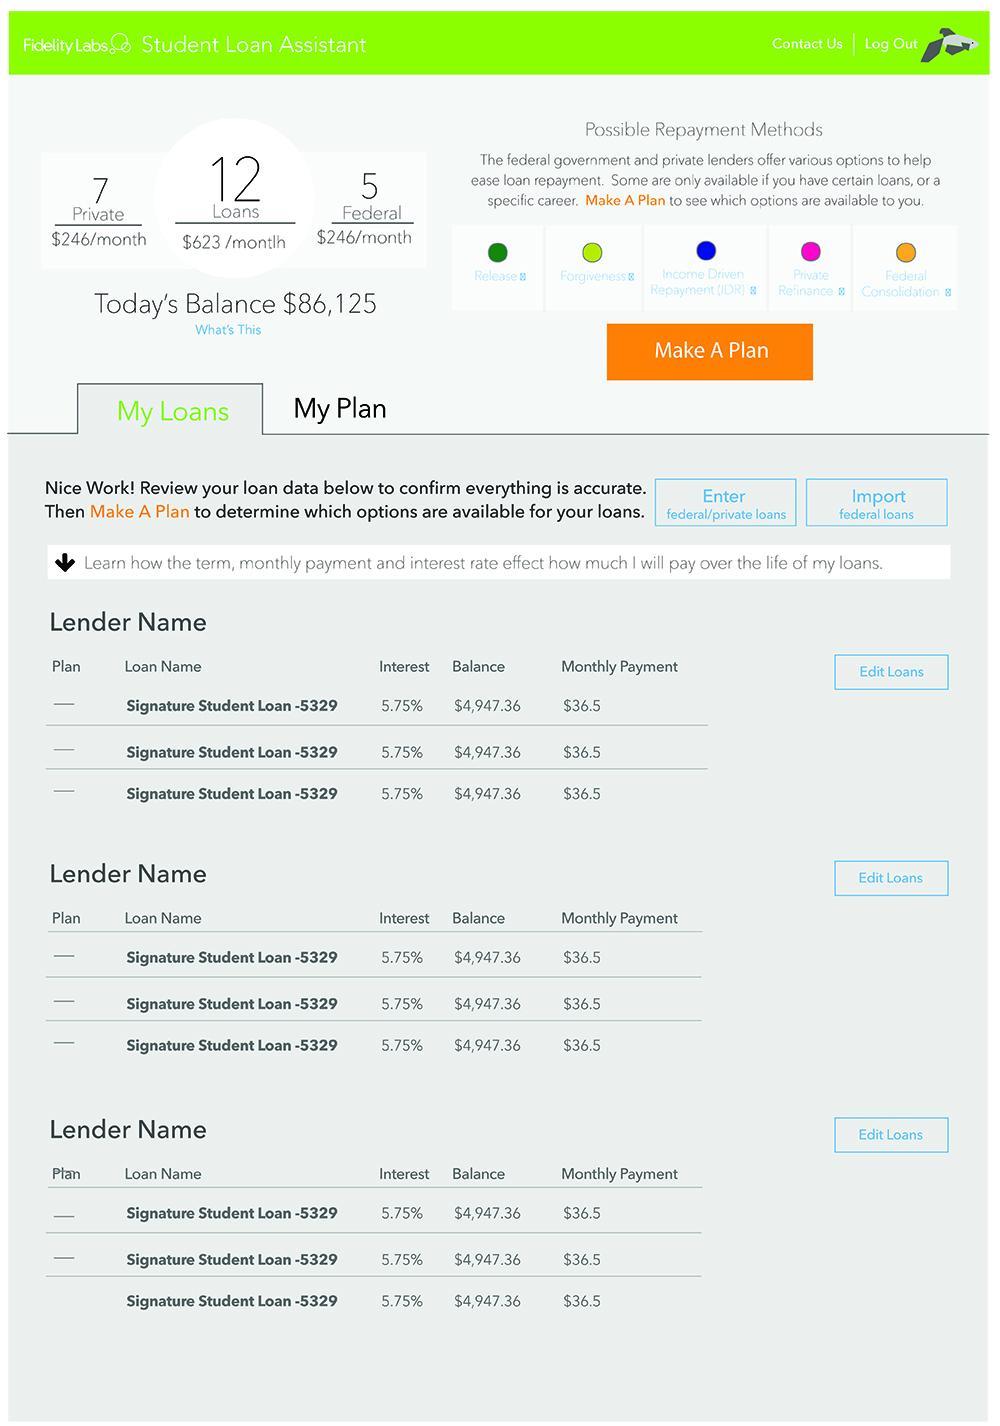 Prototype of student loan tool by Fidelity Labs.